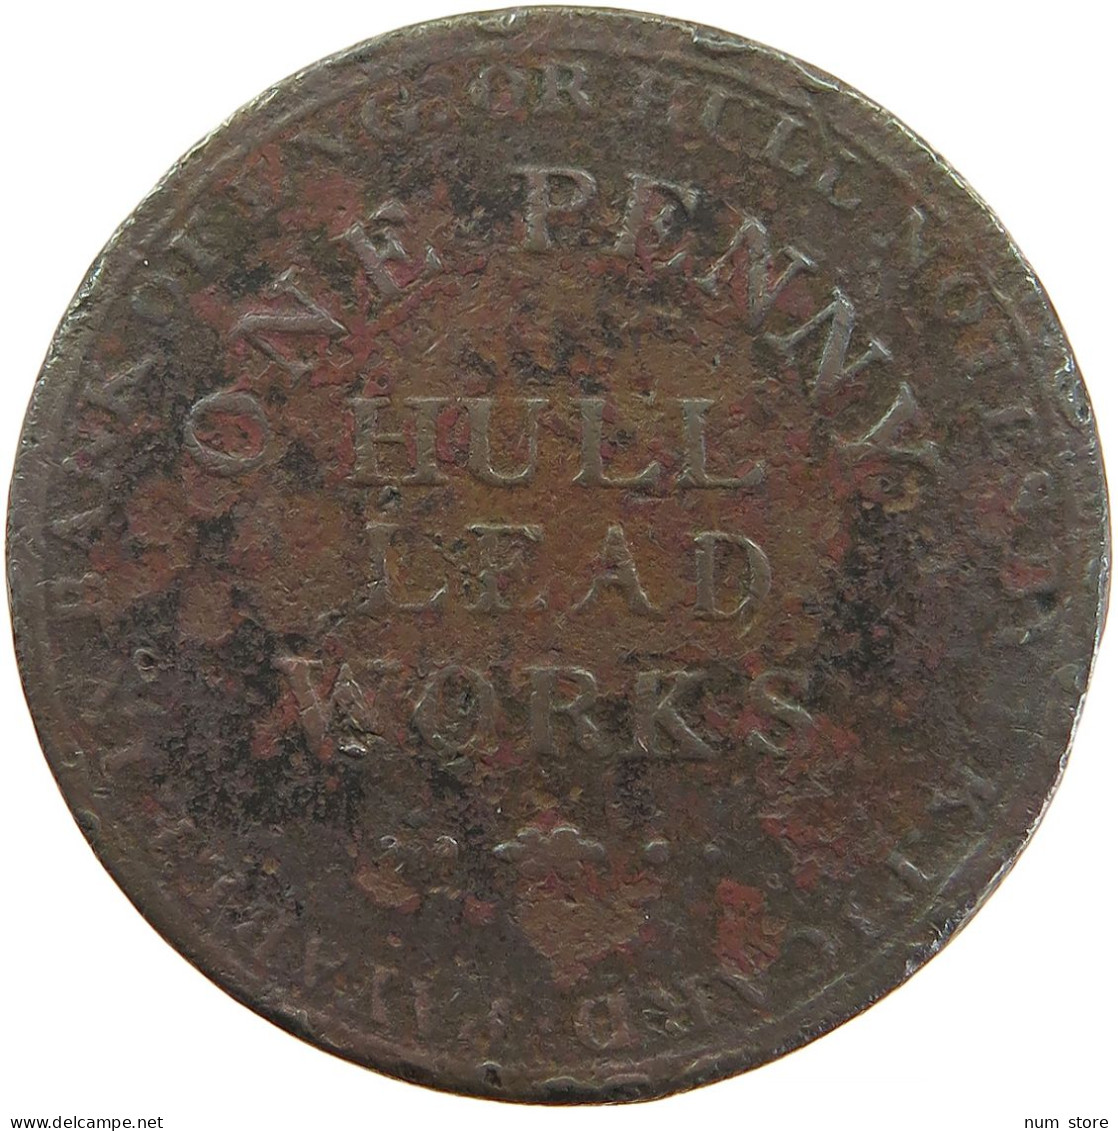 GREAT BRITAIN PENNY 1812 HULL LEAD WORKS #s082 0041 - C. 1 Penny